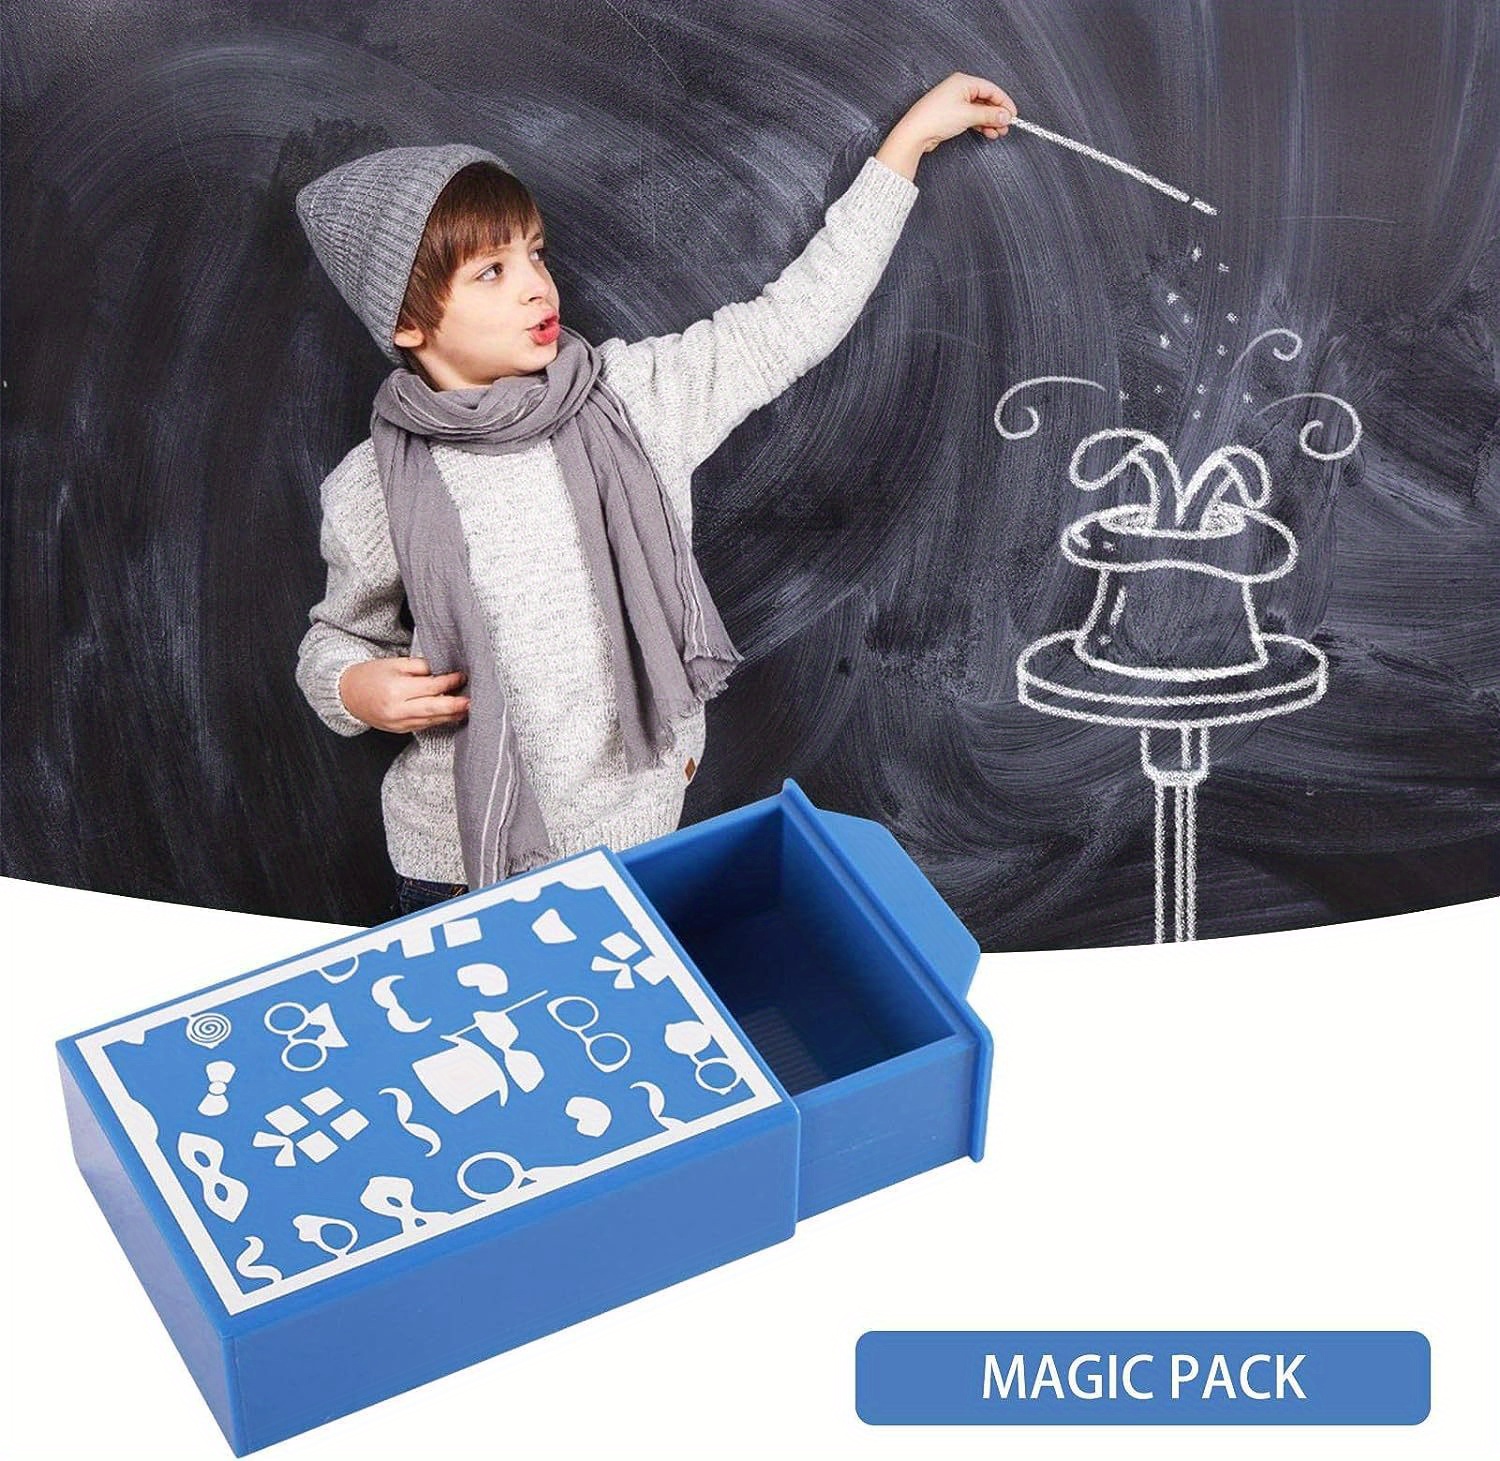 Sanwood Magic Bag Empty Magic Bag Appear Disappear Change Game Magician Trick Stage Prop Kids Toy, Red